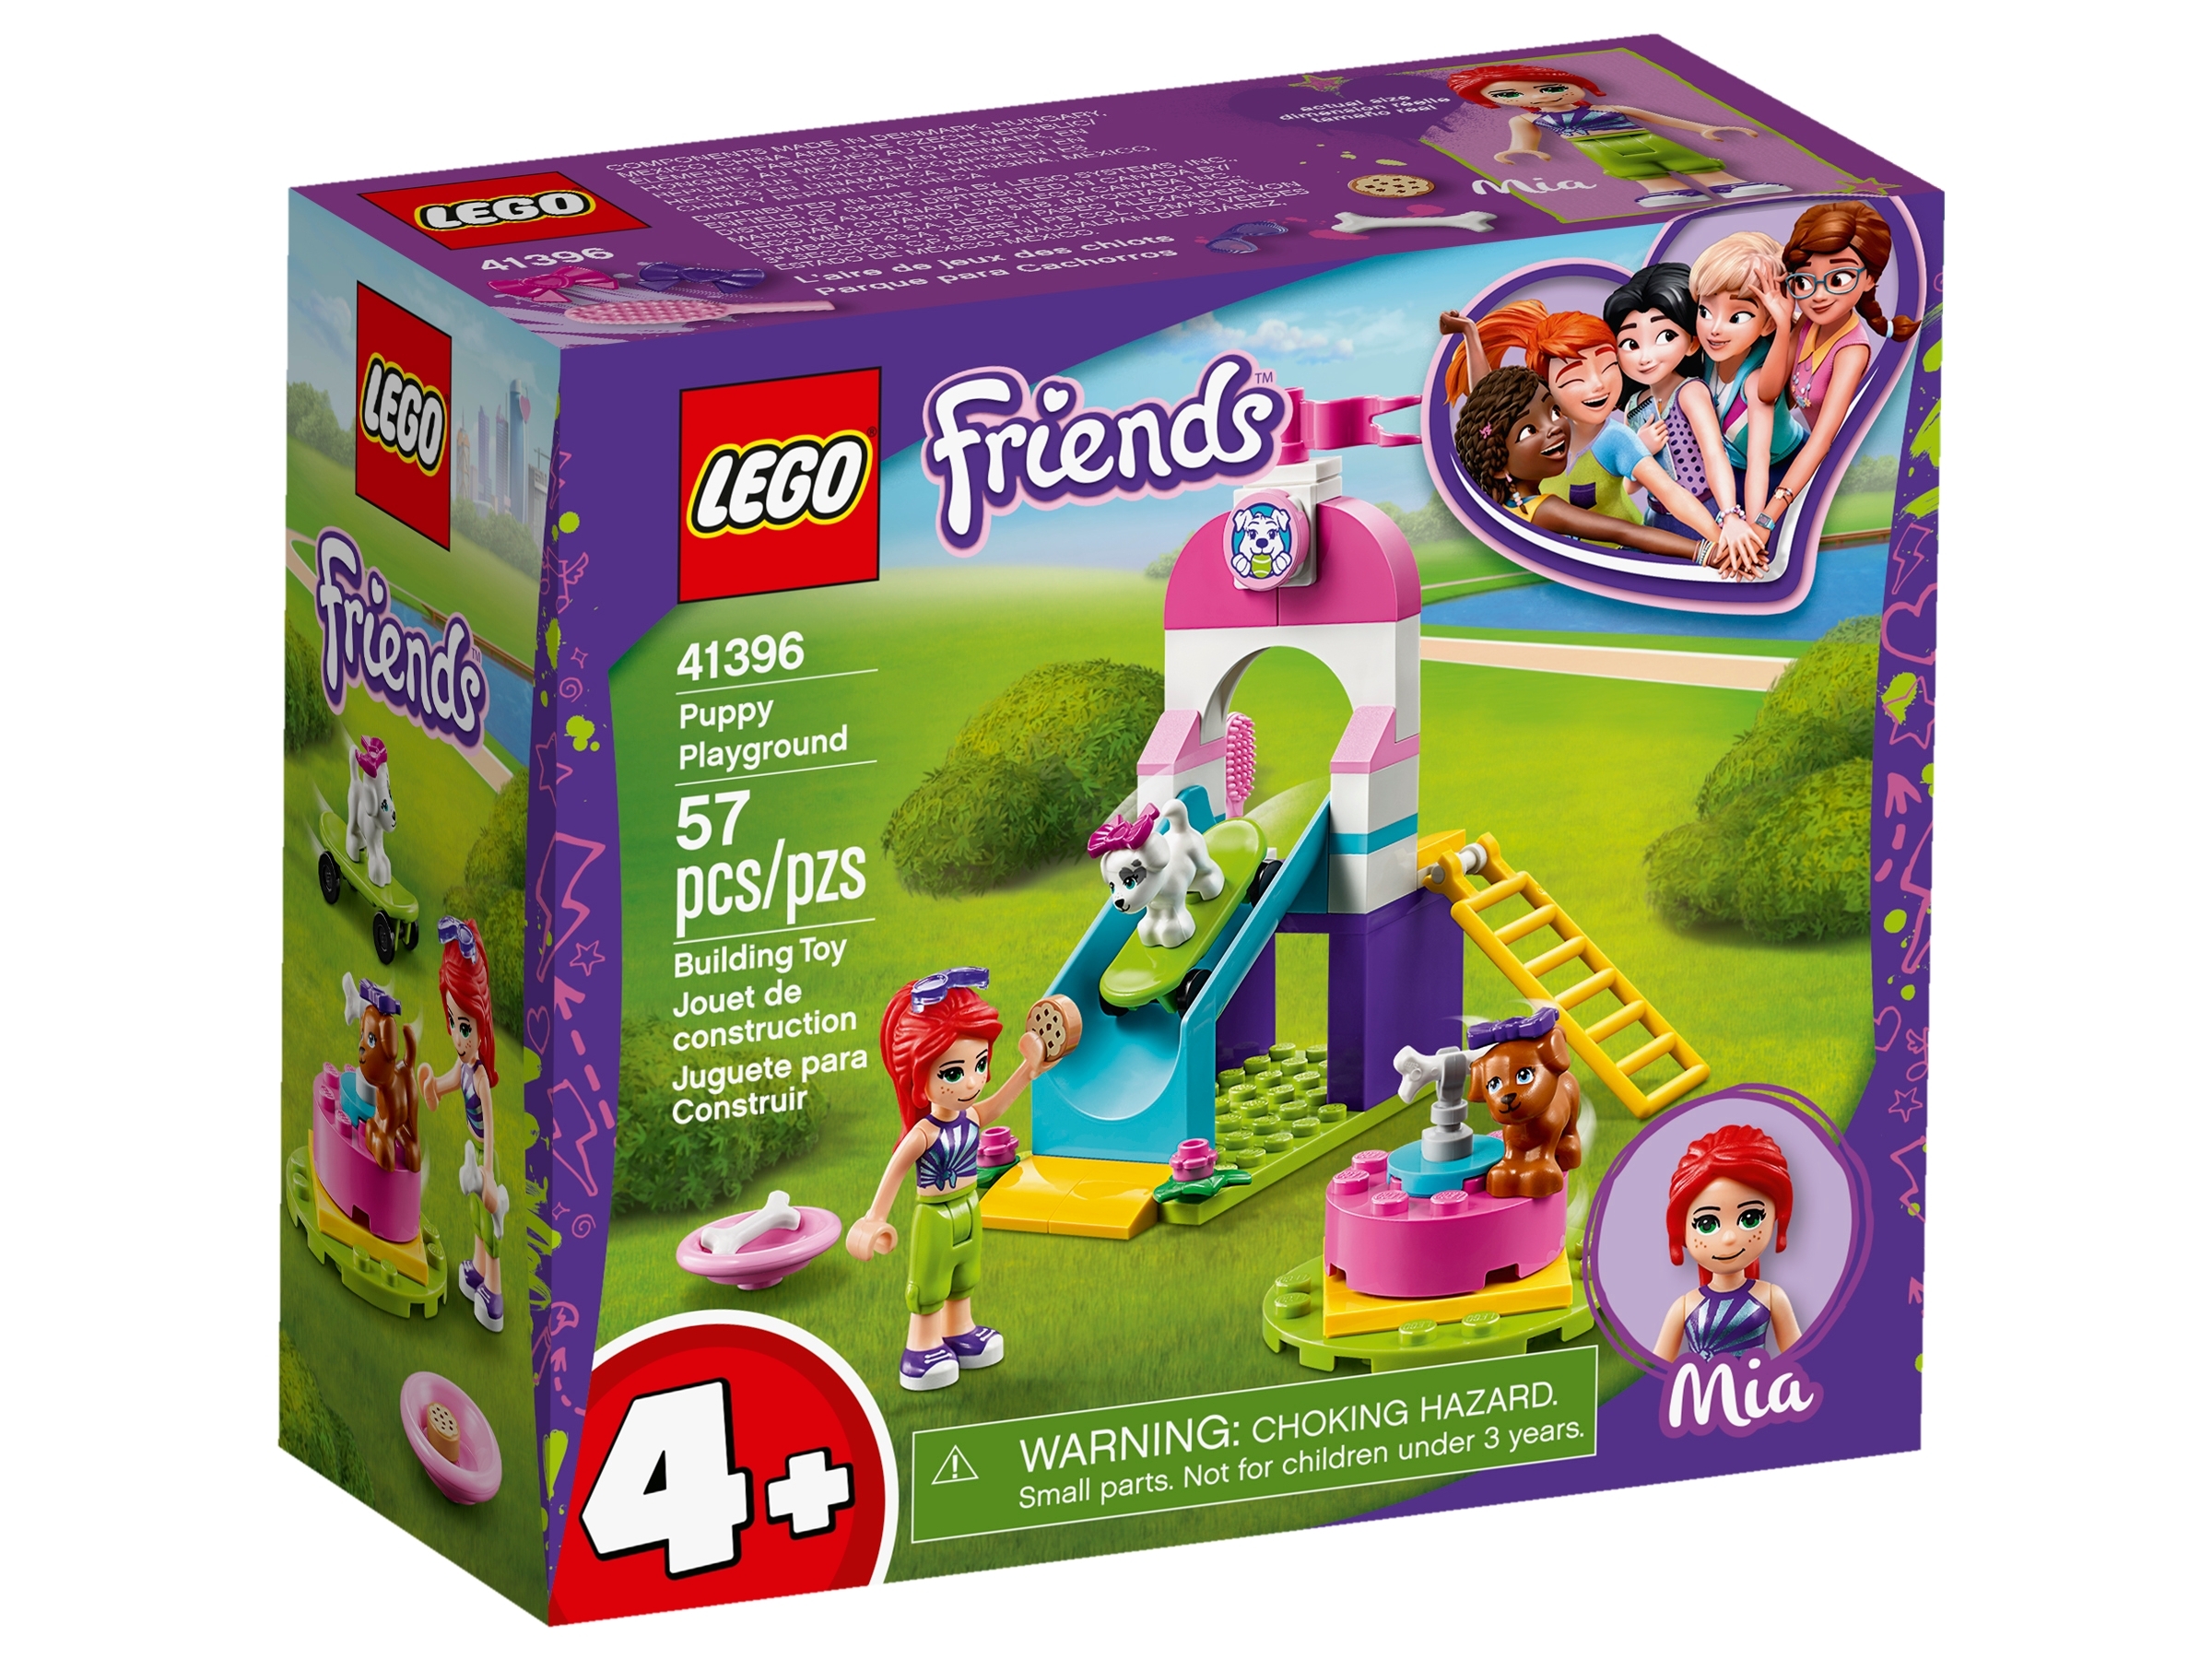 41396 LEGO Friends Puppy Playground 57 Pieces Age 4 Years+